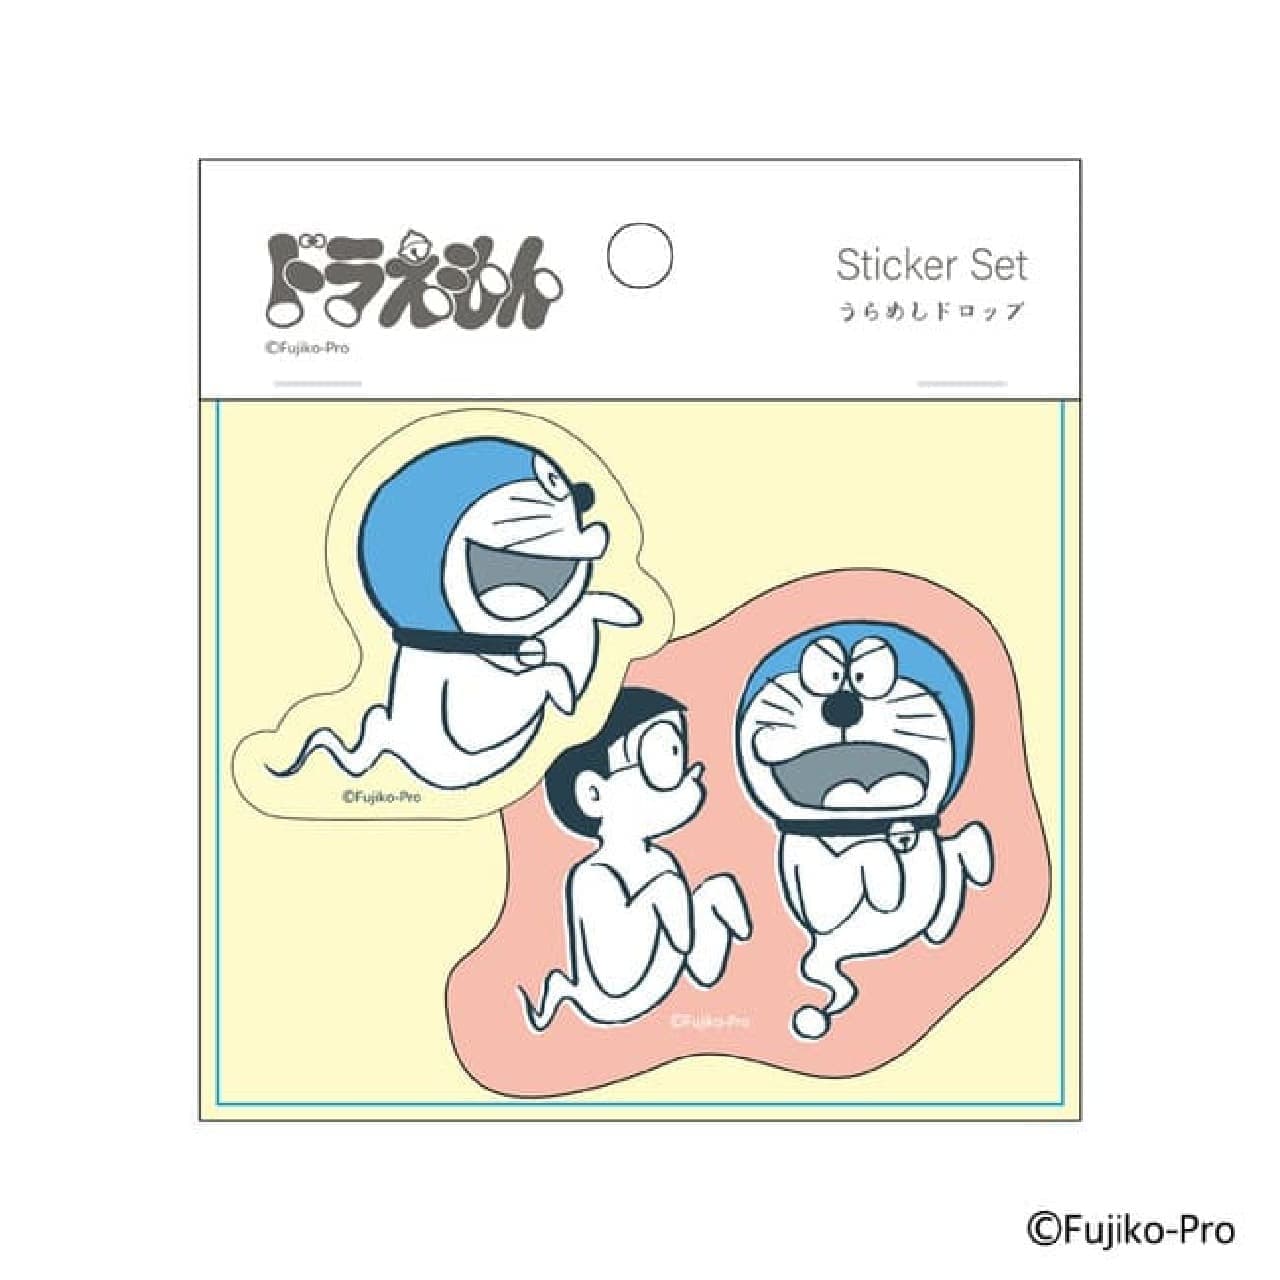 Stationery "Doraemon Secret Tool Series" is now available from the Post Office Product Sales Service.